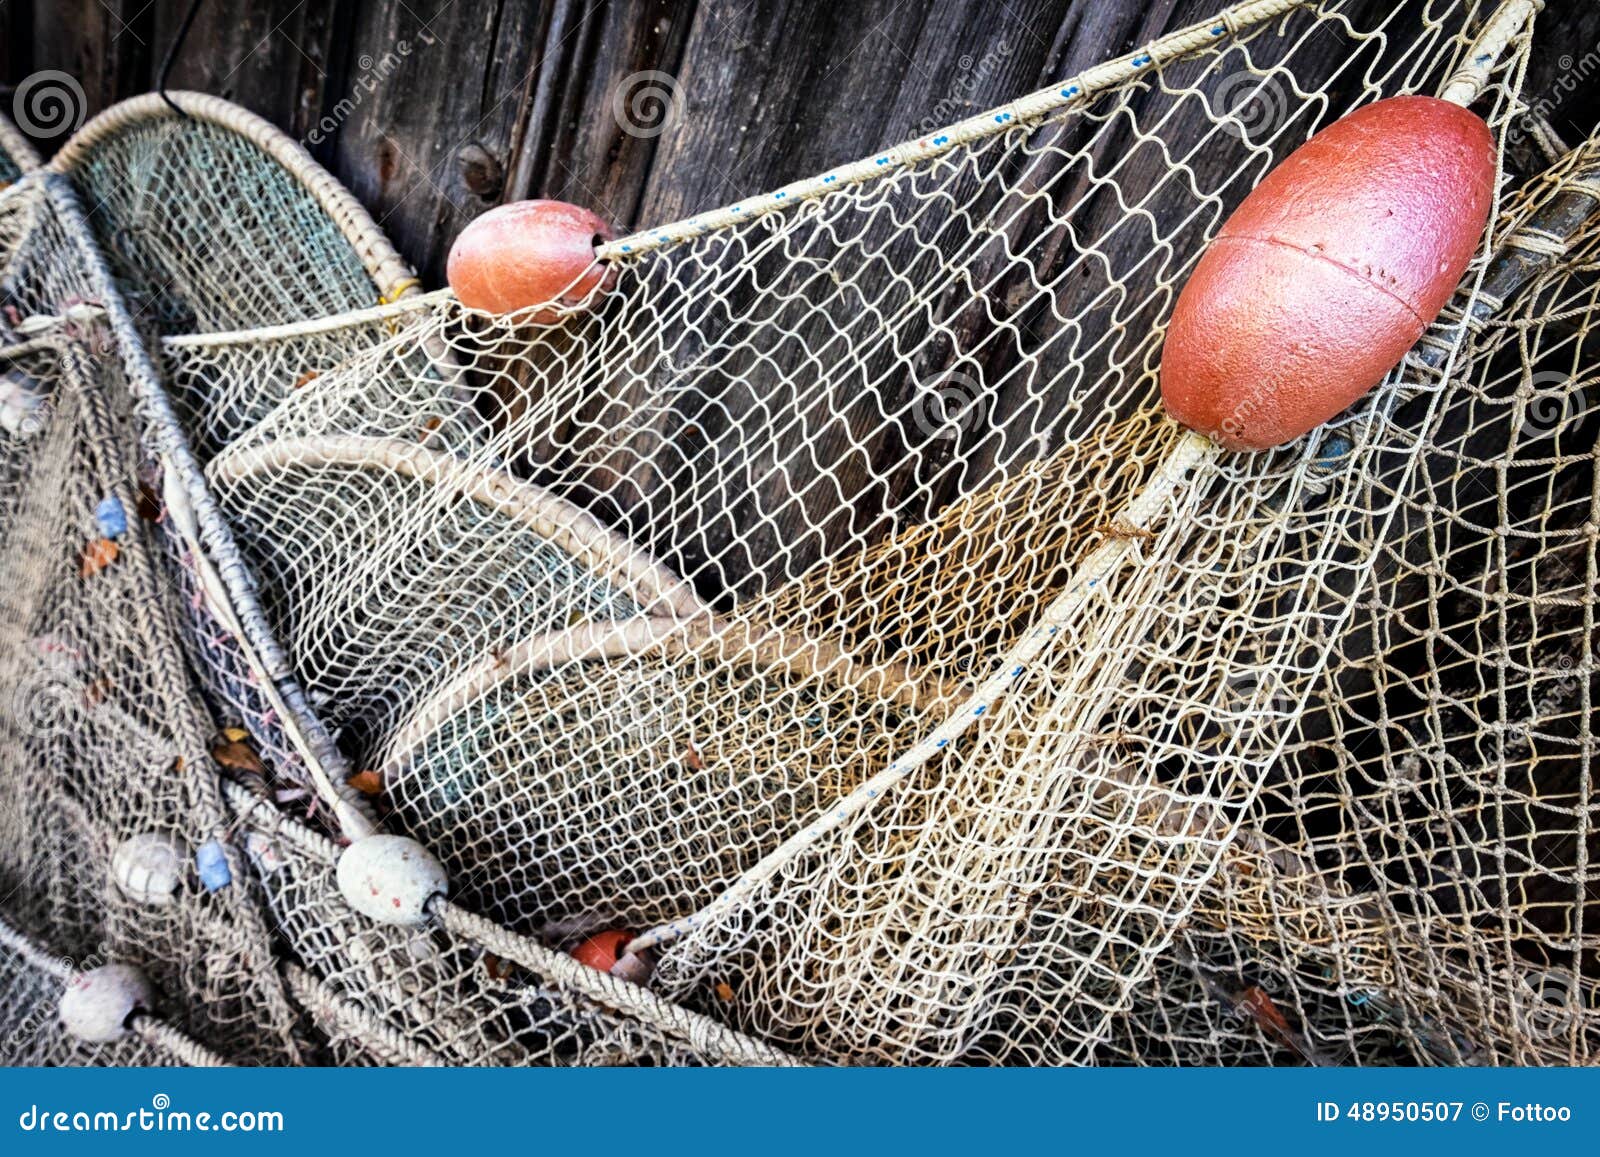 770 Old Fishing Net Cork Stock Photos - Free & Royalty-Free Stock Photos  from Dreamstime